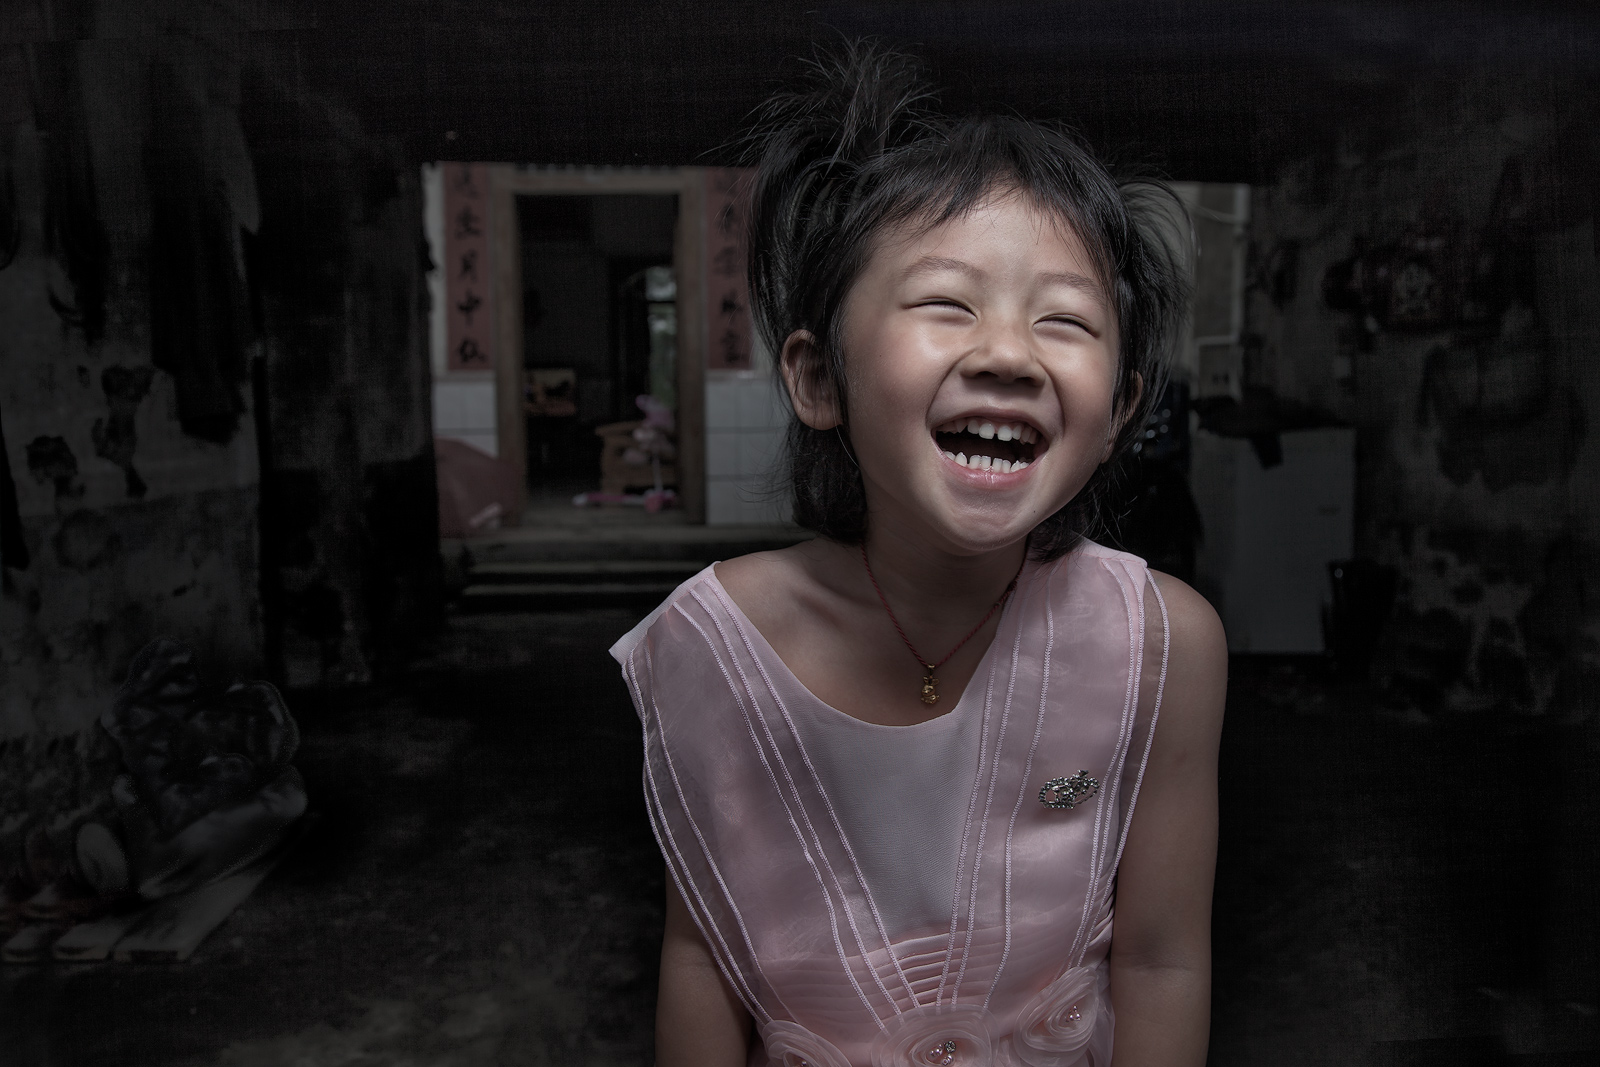 A young Chinese girl is thrilled to get her picture taken.